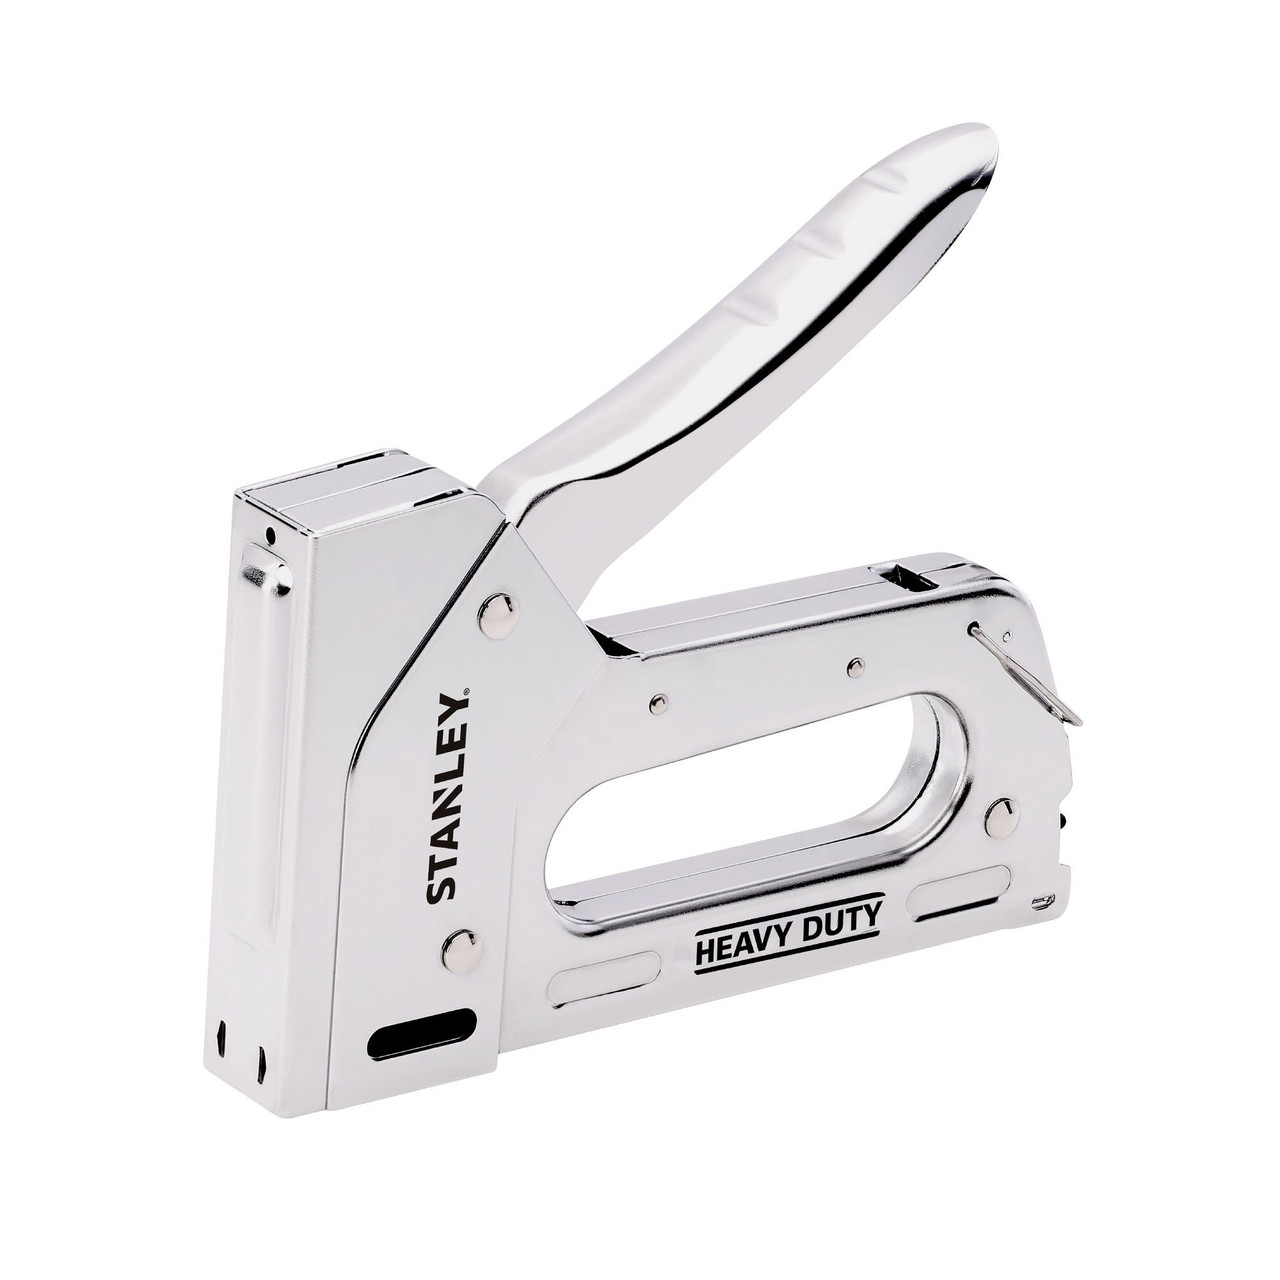 Wholesale manual picture frame stapler For All Your Stapling Needs